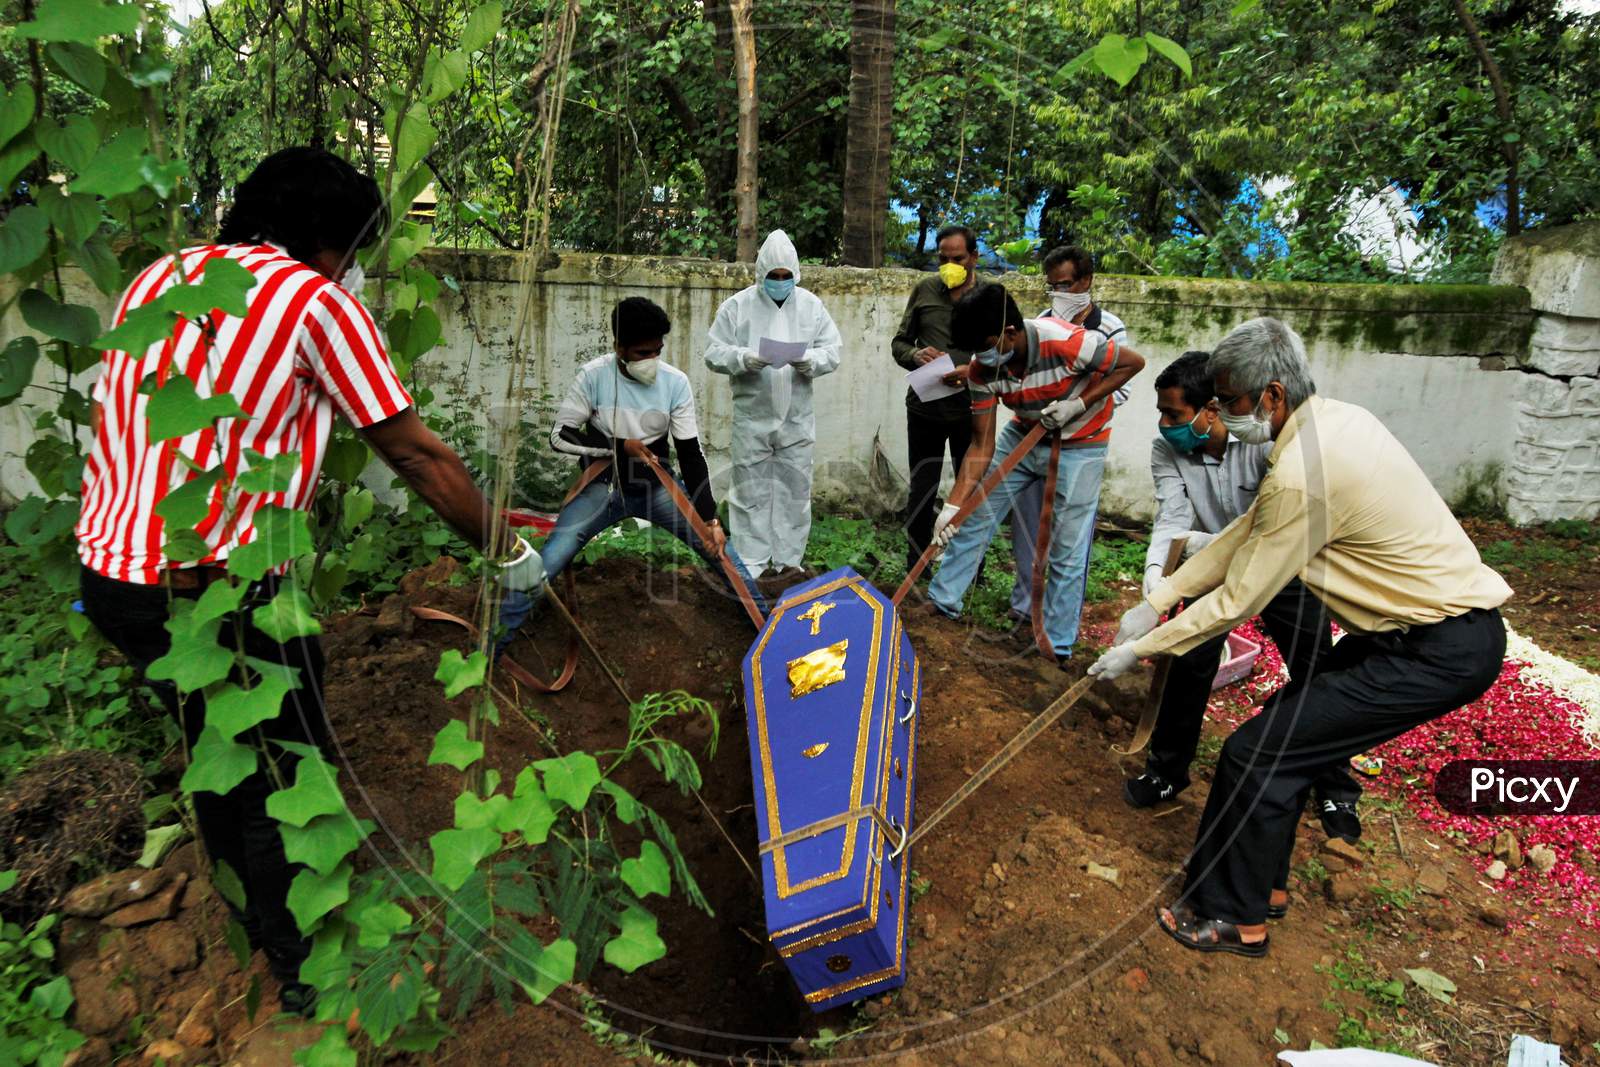 People lower the coffin of a victim who died from the coronavirus disease (COVID-19) into a grave at a cemetery as a priest wearing personal protective equipment (PPE) and relatives watch, during a funeral in Mumbai, India, June 27, 2020.